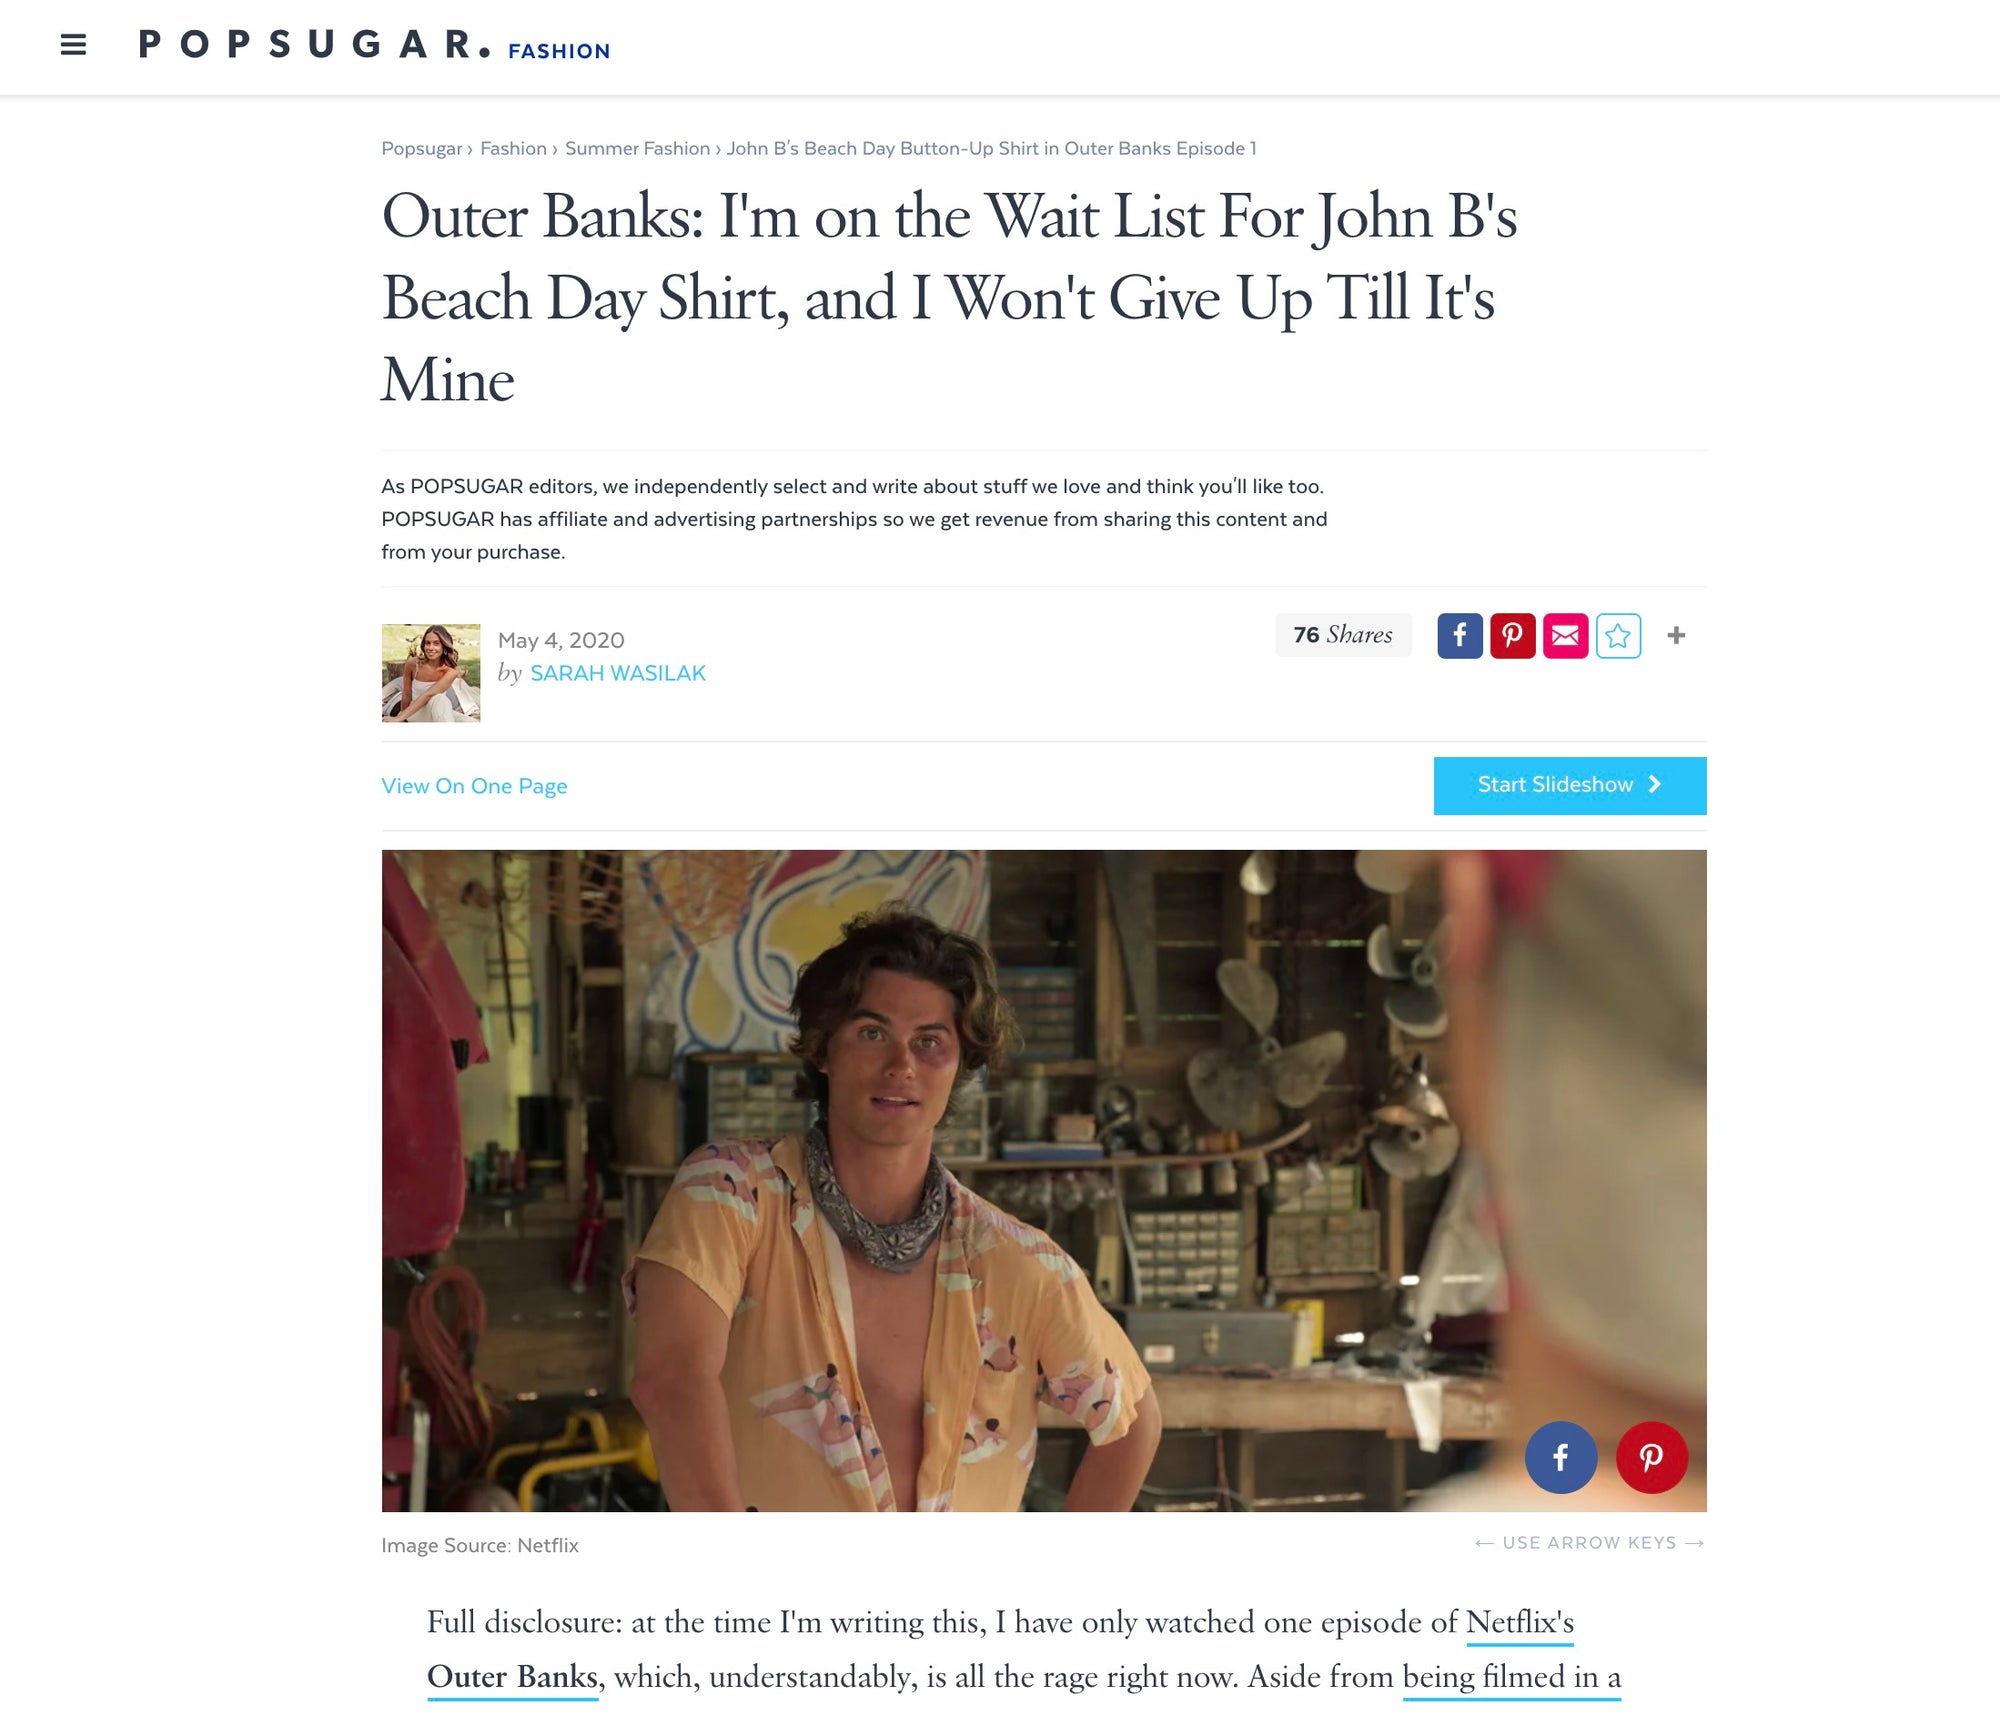 A couple of our buttonups were featured in Netflix's Outer Banks and the buzz has been crazy. Restock alerts, magazine writeups featuring the beach day buttonup, you name it - it's been a wild ride since the show was released.